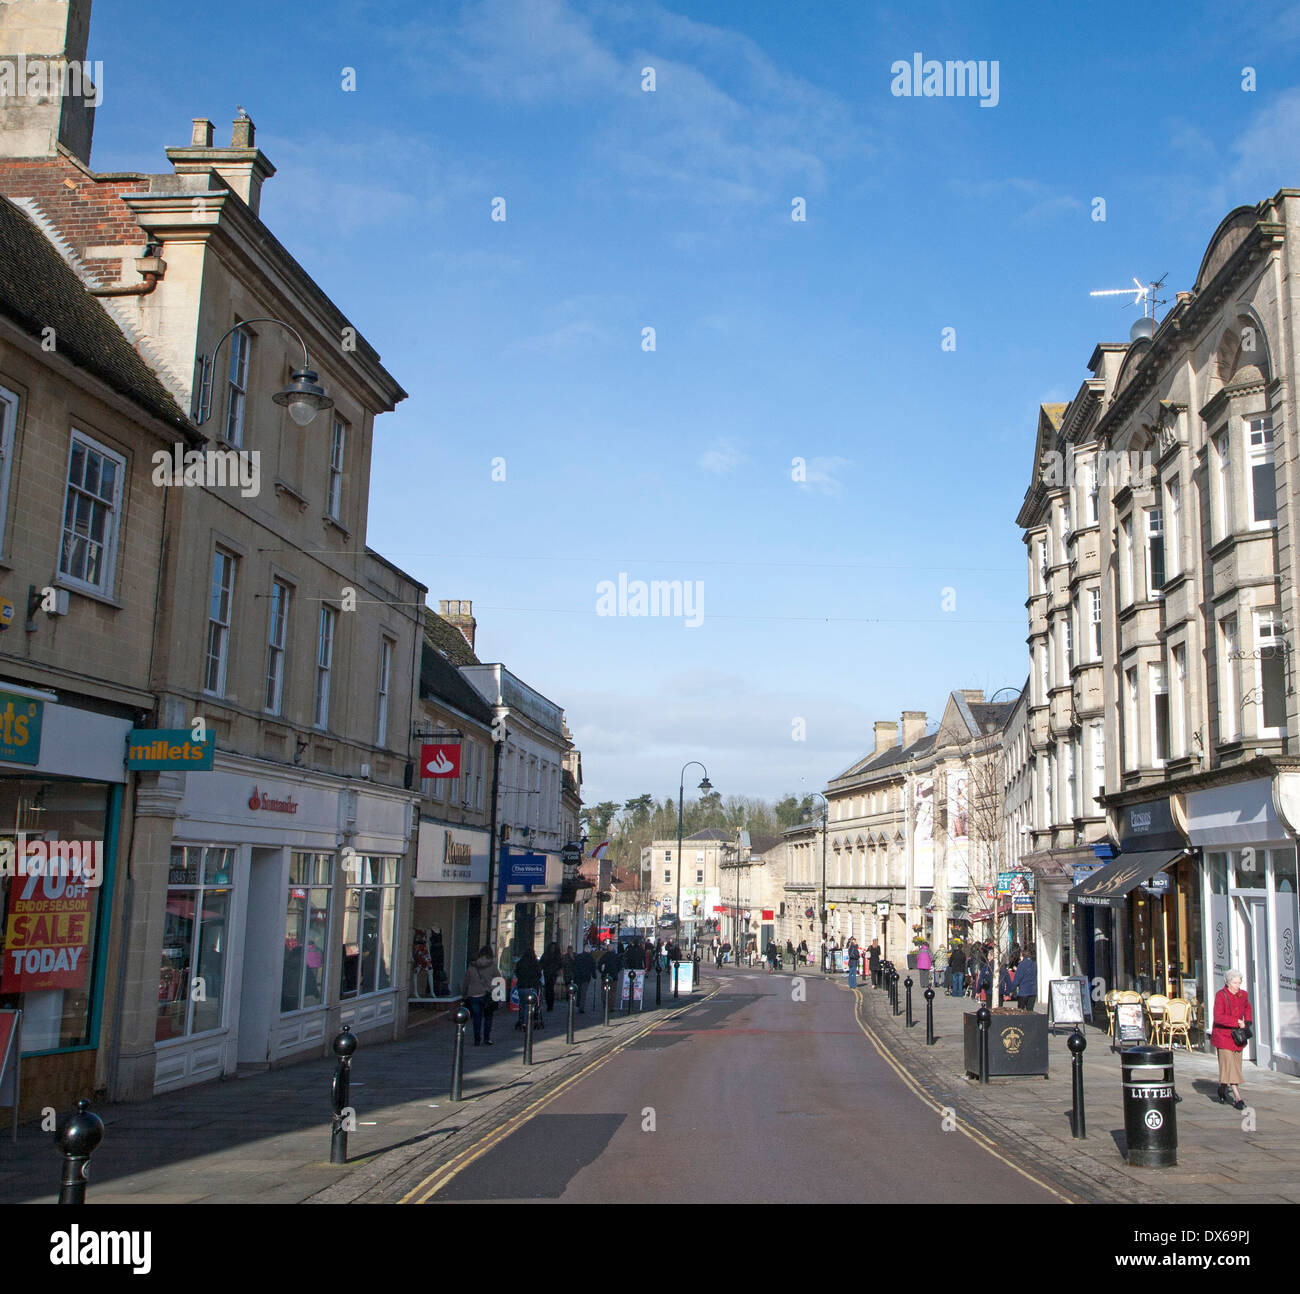 Shops and shoppers in the High Street of the town of Chippenham, Wiltshire, England Stock Photo